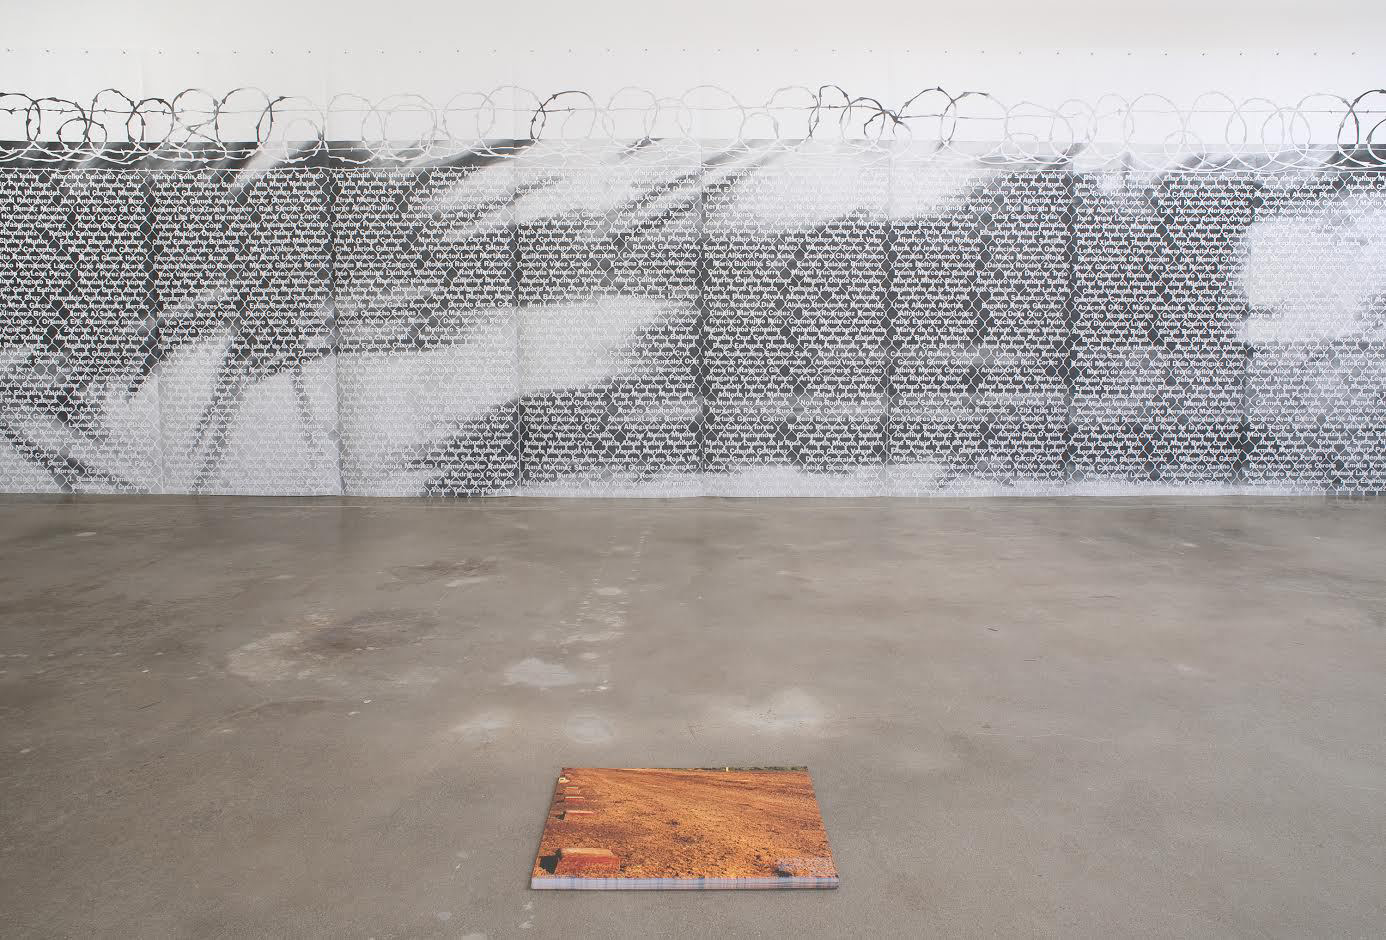 Andrea Bowers, <em>No Olvidado - Not Forgotten</em>, 2010. Graphite on paper, 23 drawings, 50 x 120 in. each. Photos: Robert Wedemeyer. All images courtesy Susanne Vielmetter Los Angeles Projects.